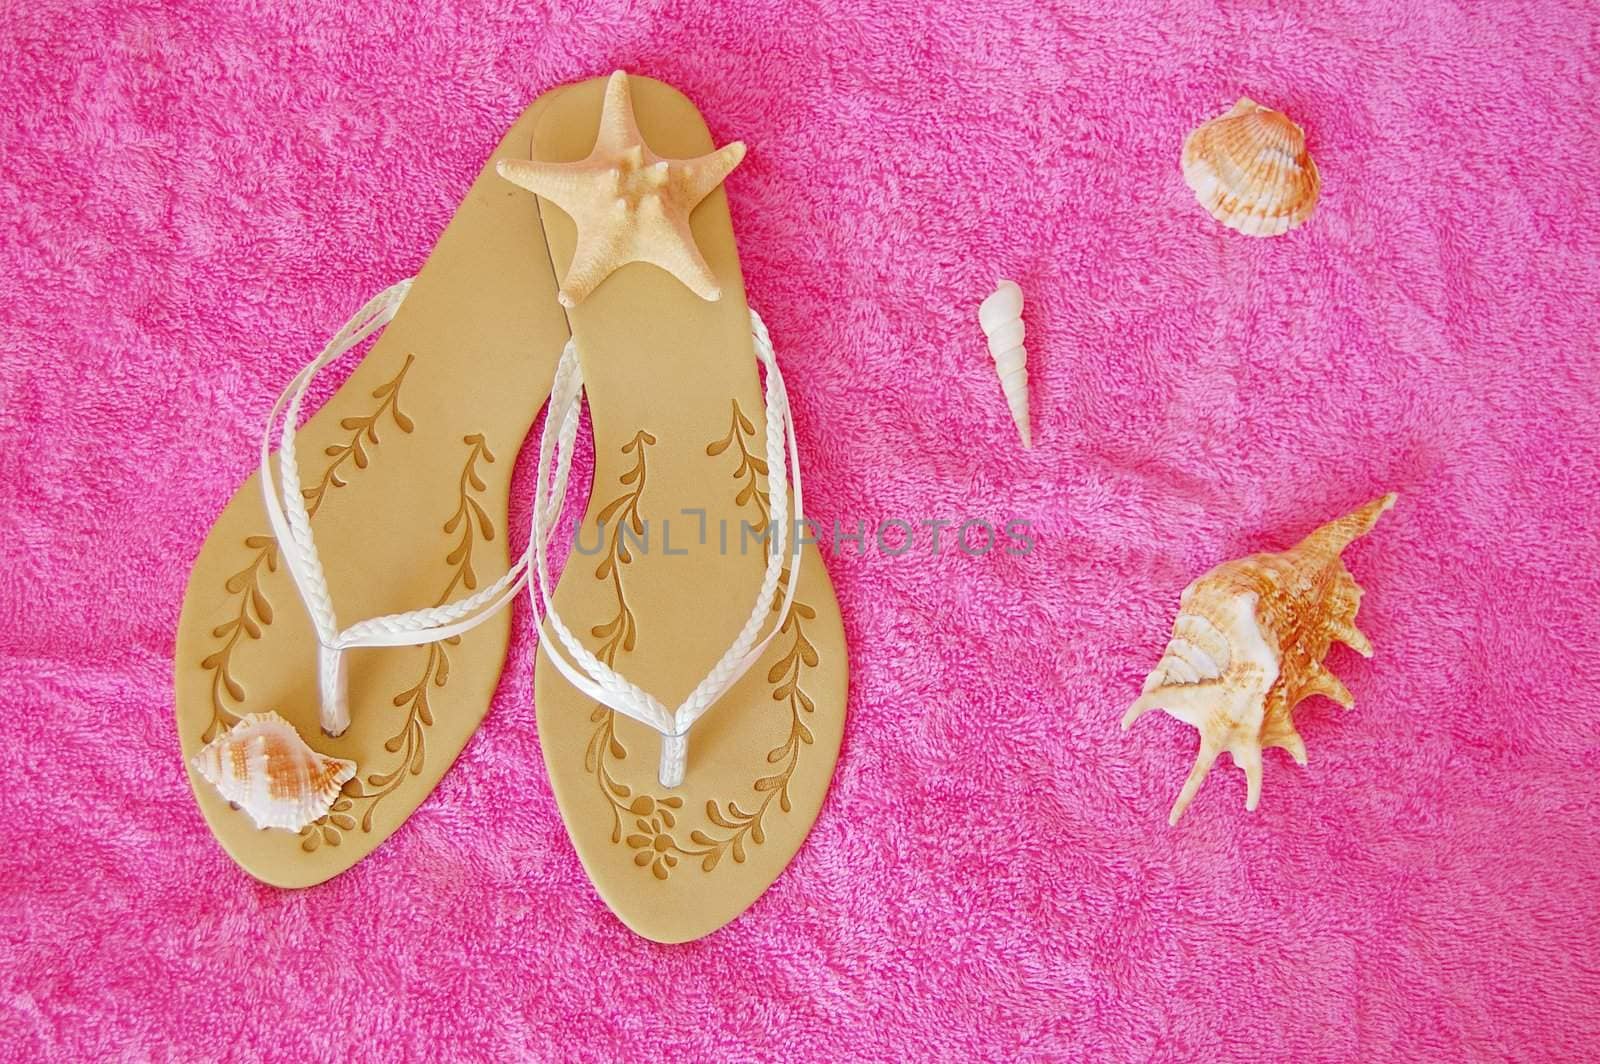 beach sandals with seashells on pink towel